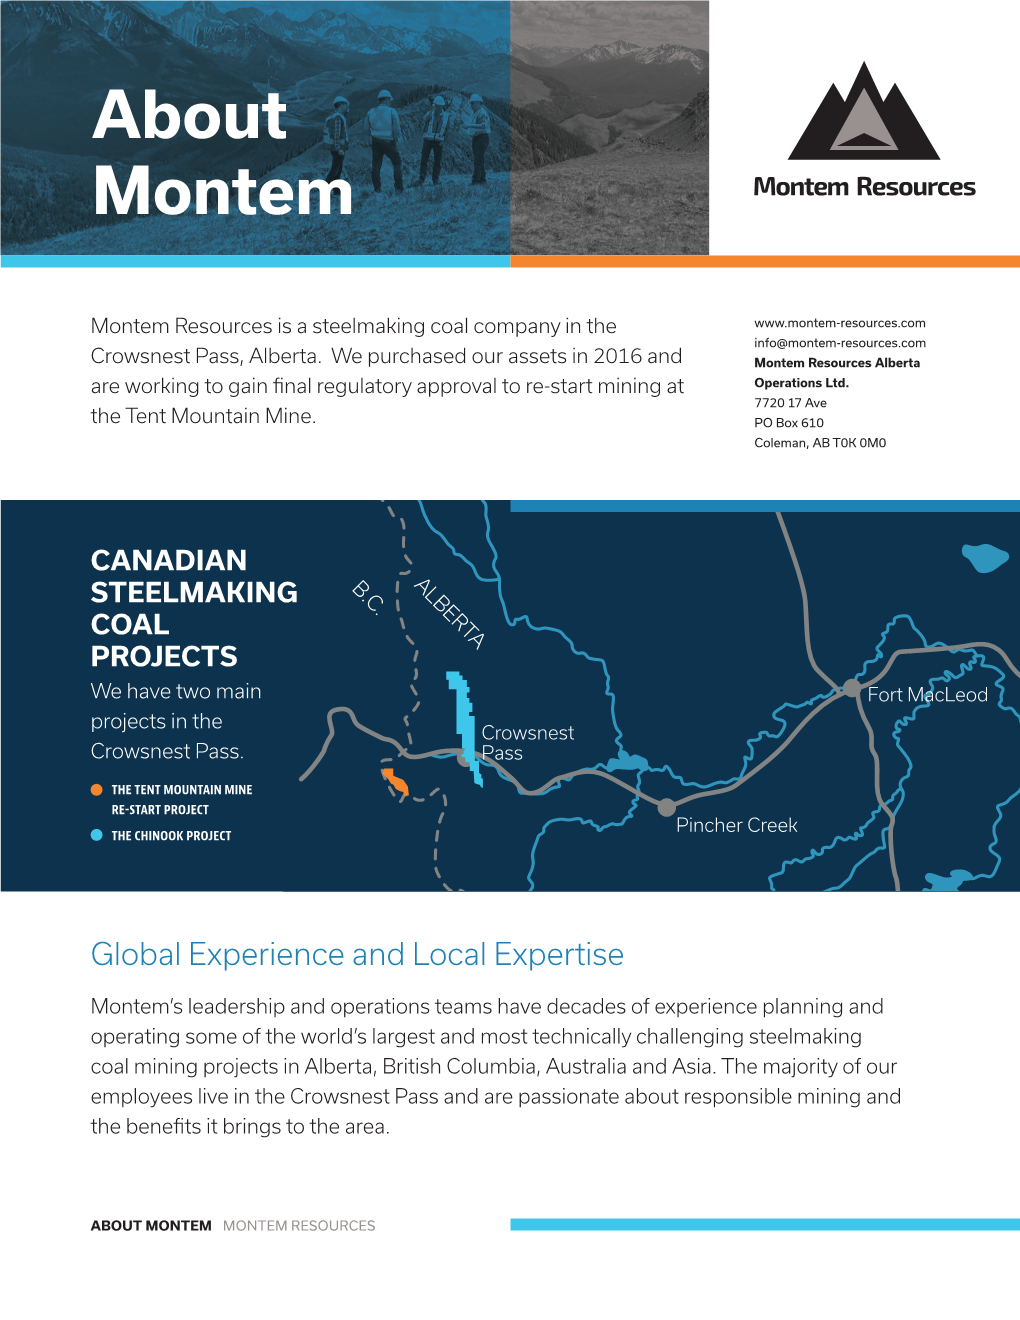 ABOUT MONTEM MONTEM RESOURCES Coal Mining in the Crowsnest Pass